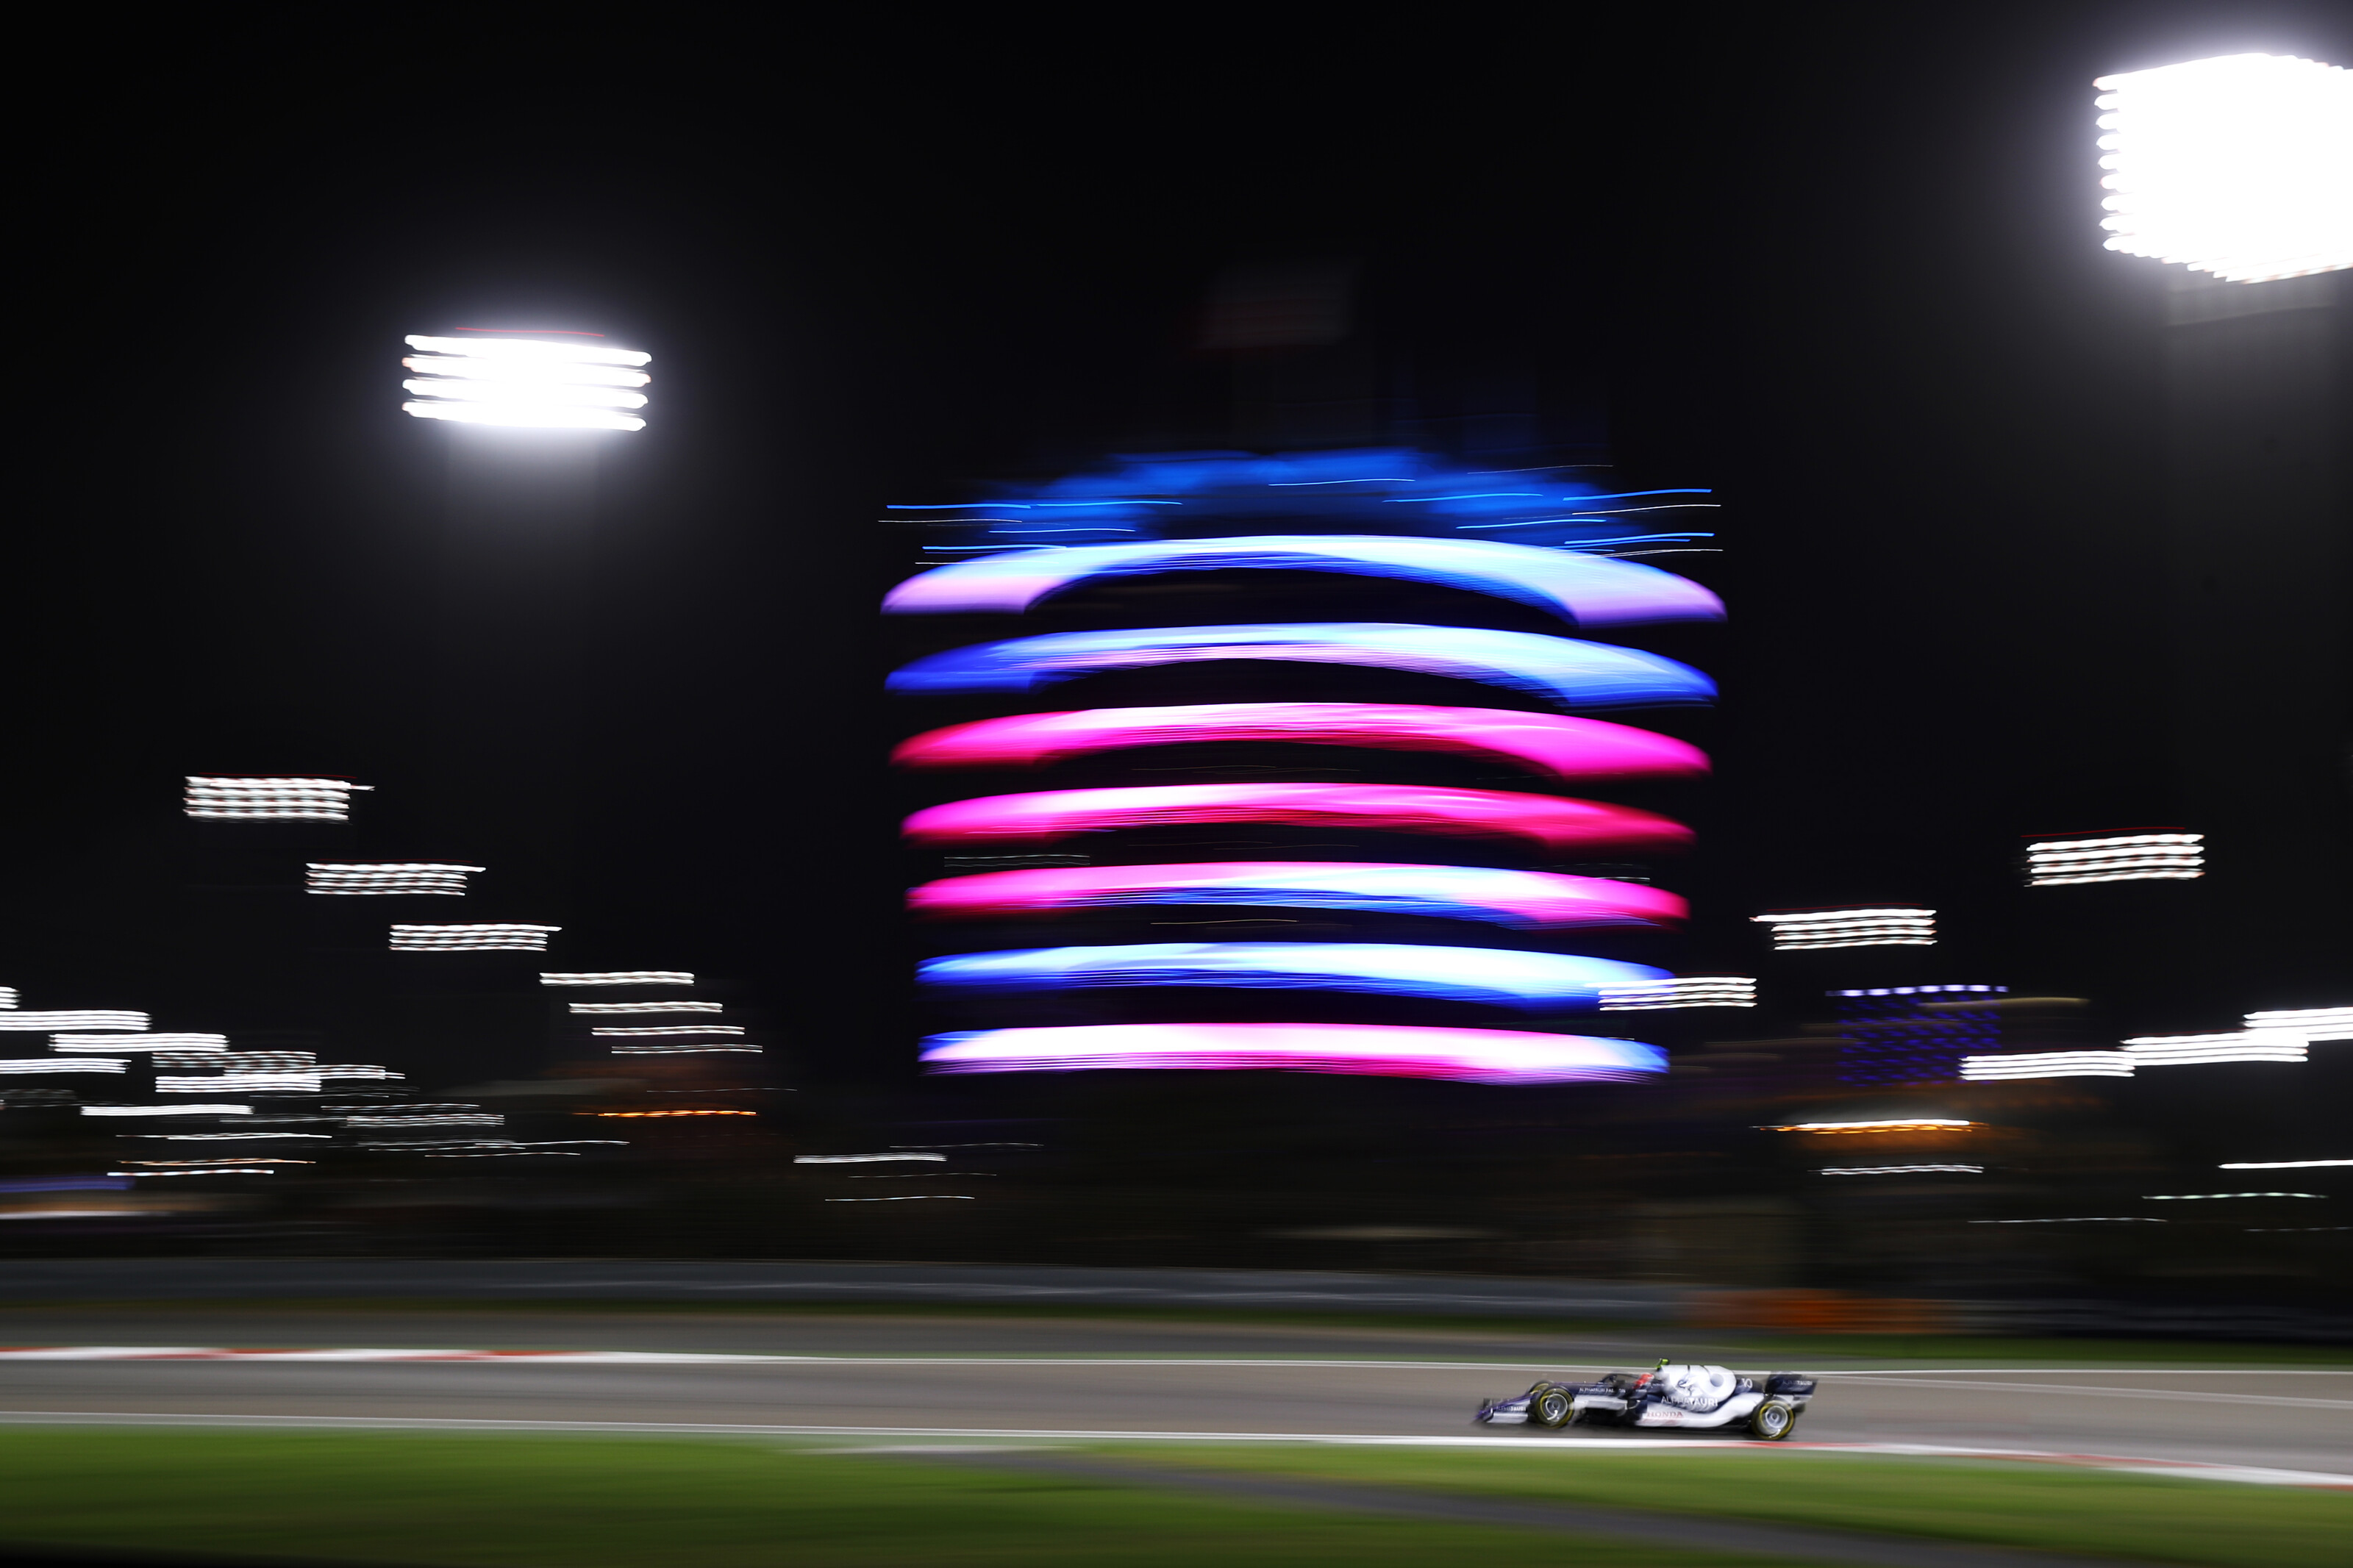 Time to get the sandbags off + 5 things to watch for - 2022 Bahrain GP Preview